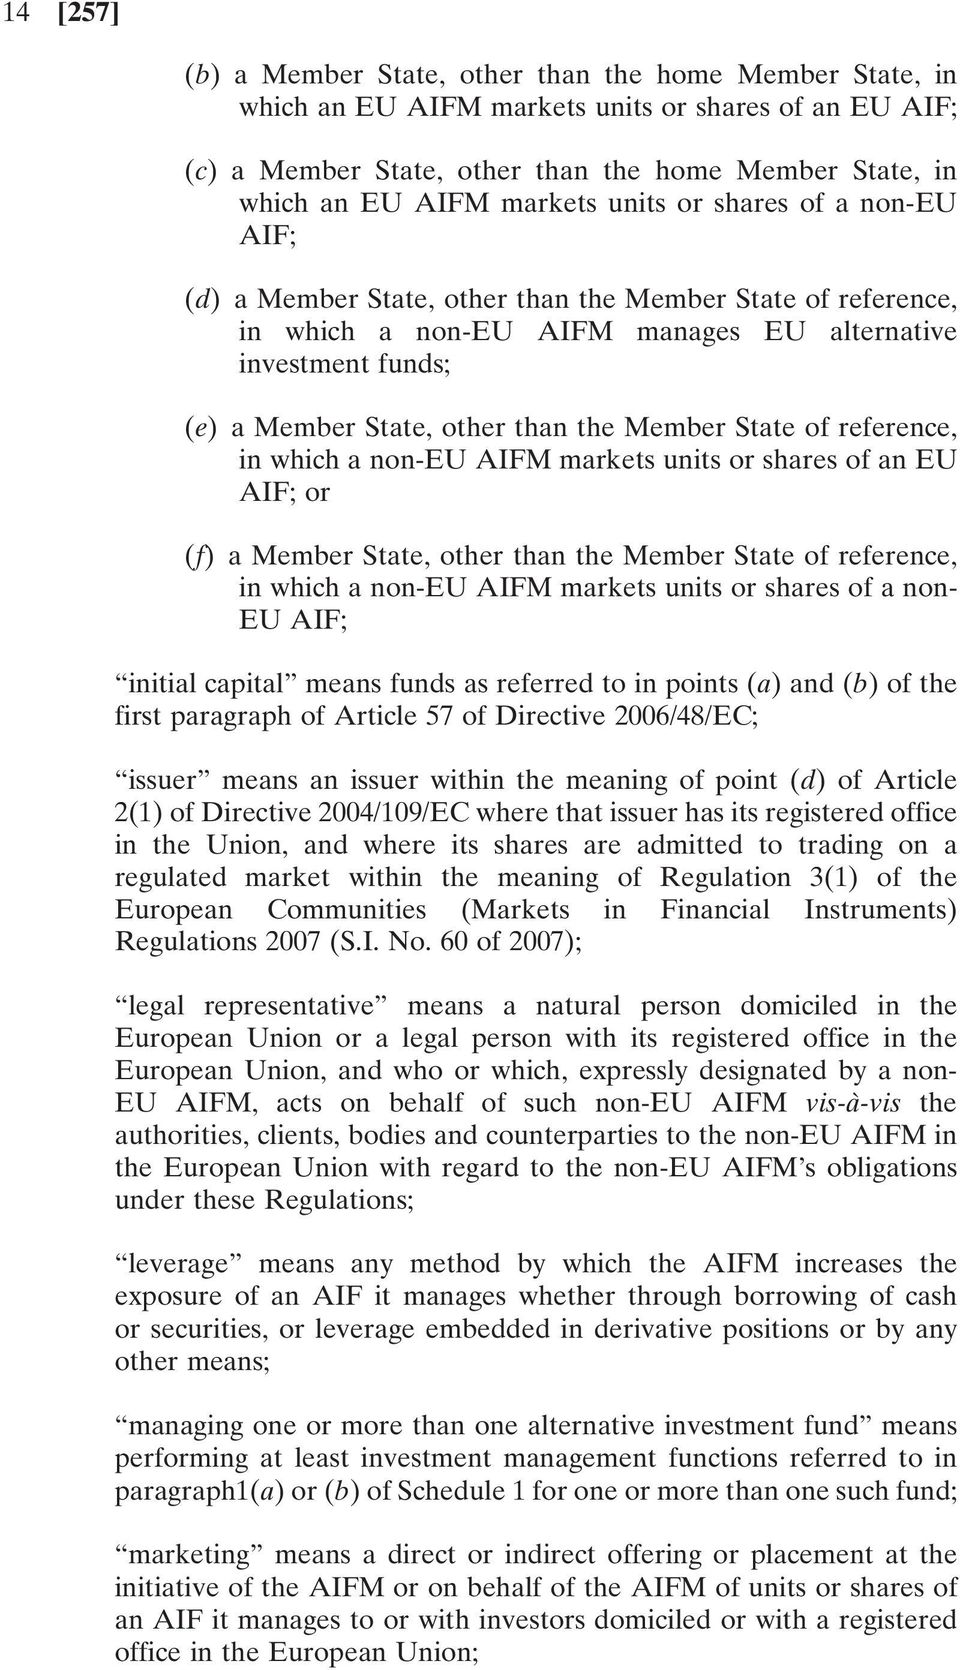 the Member State of reference, in which a non-eu AIFM markets units or shares of an EU AIF; or (f) a Member State, other than the Member State of reference, in which a non-eu AIFM markets units or